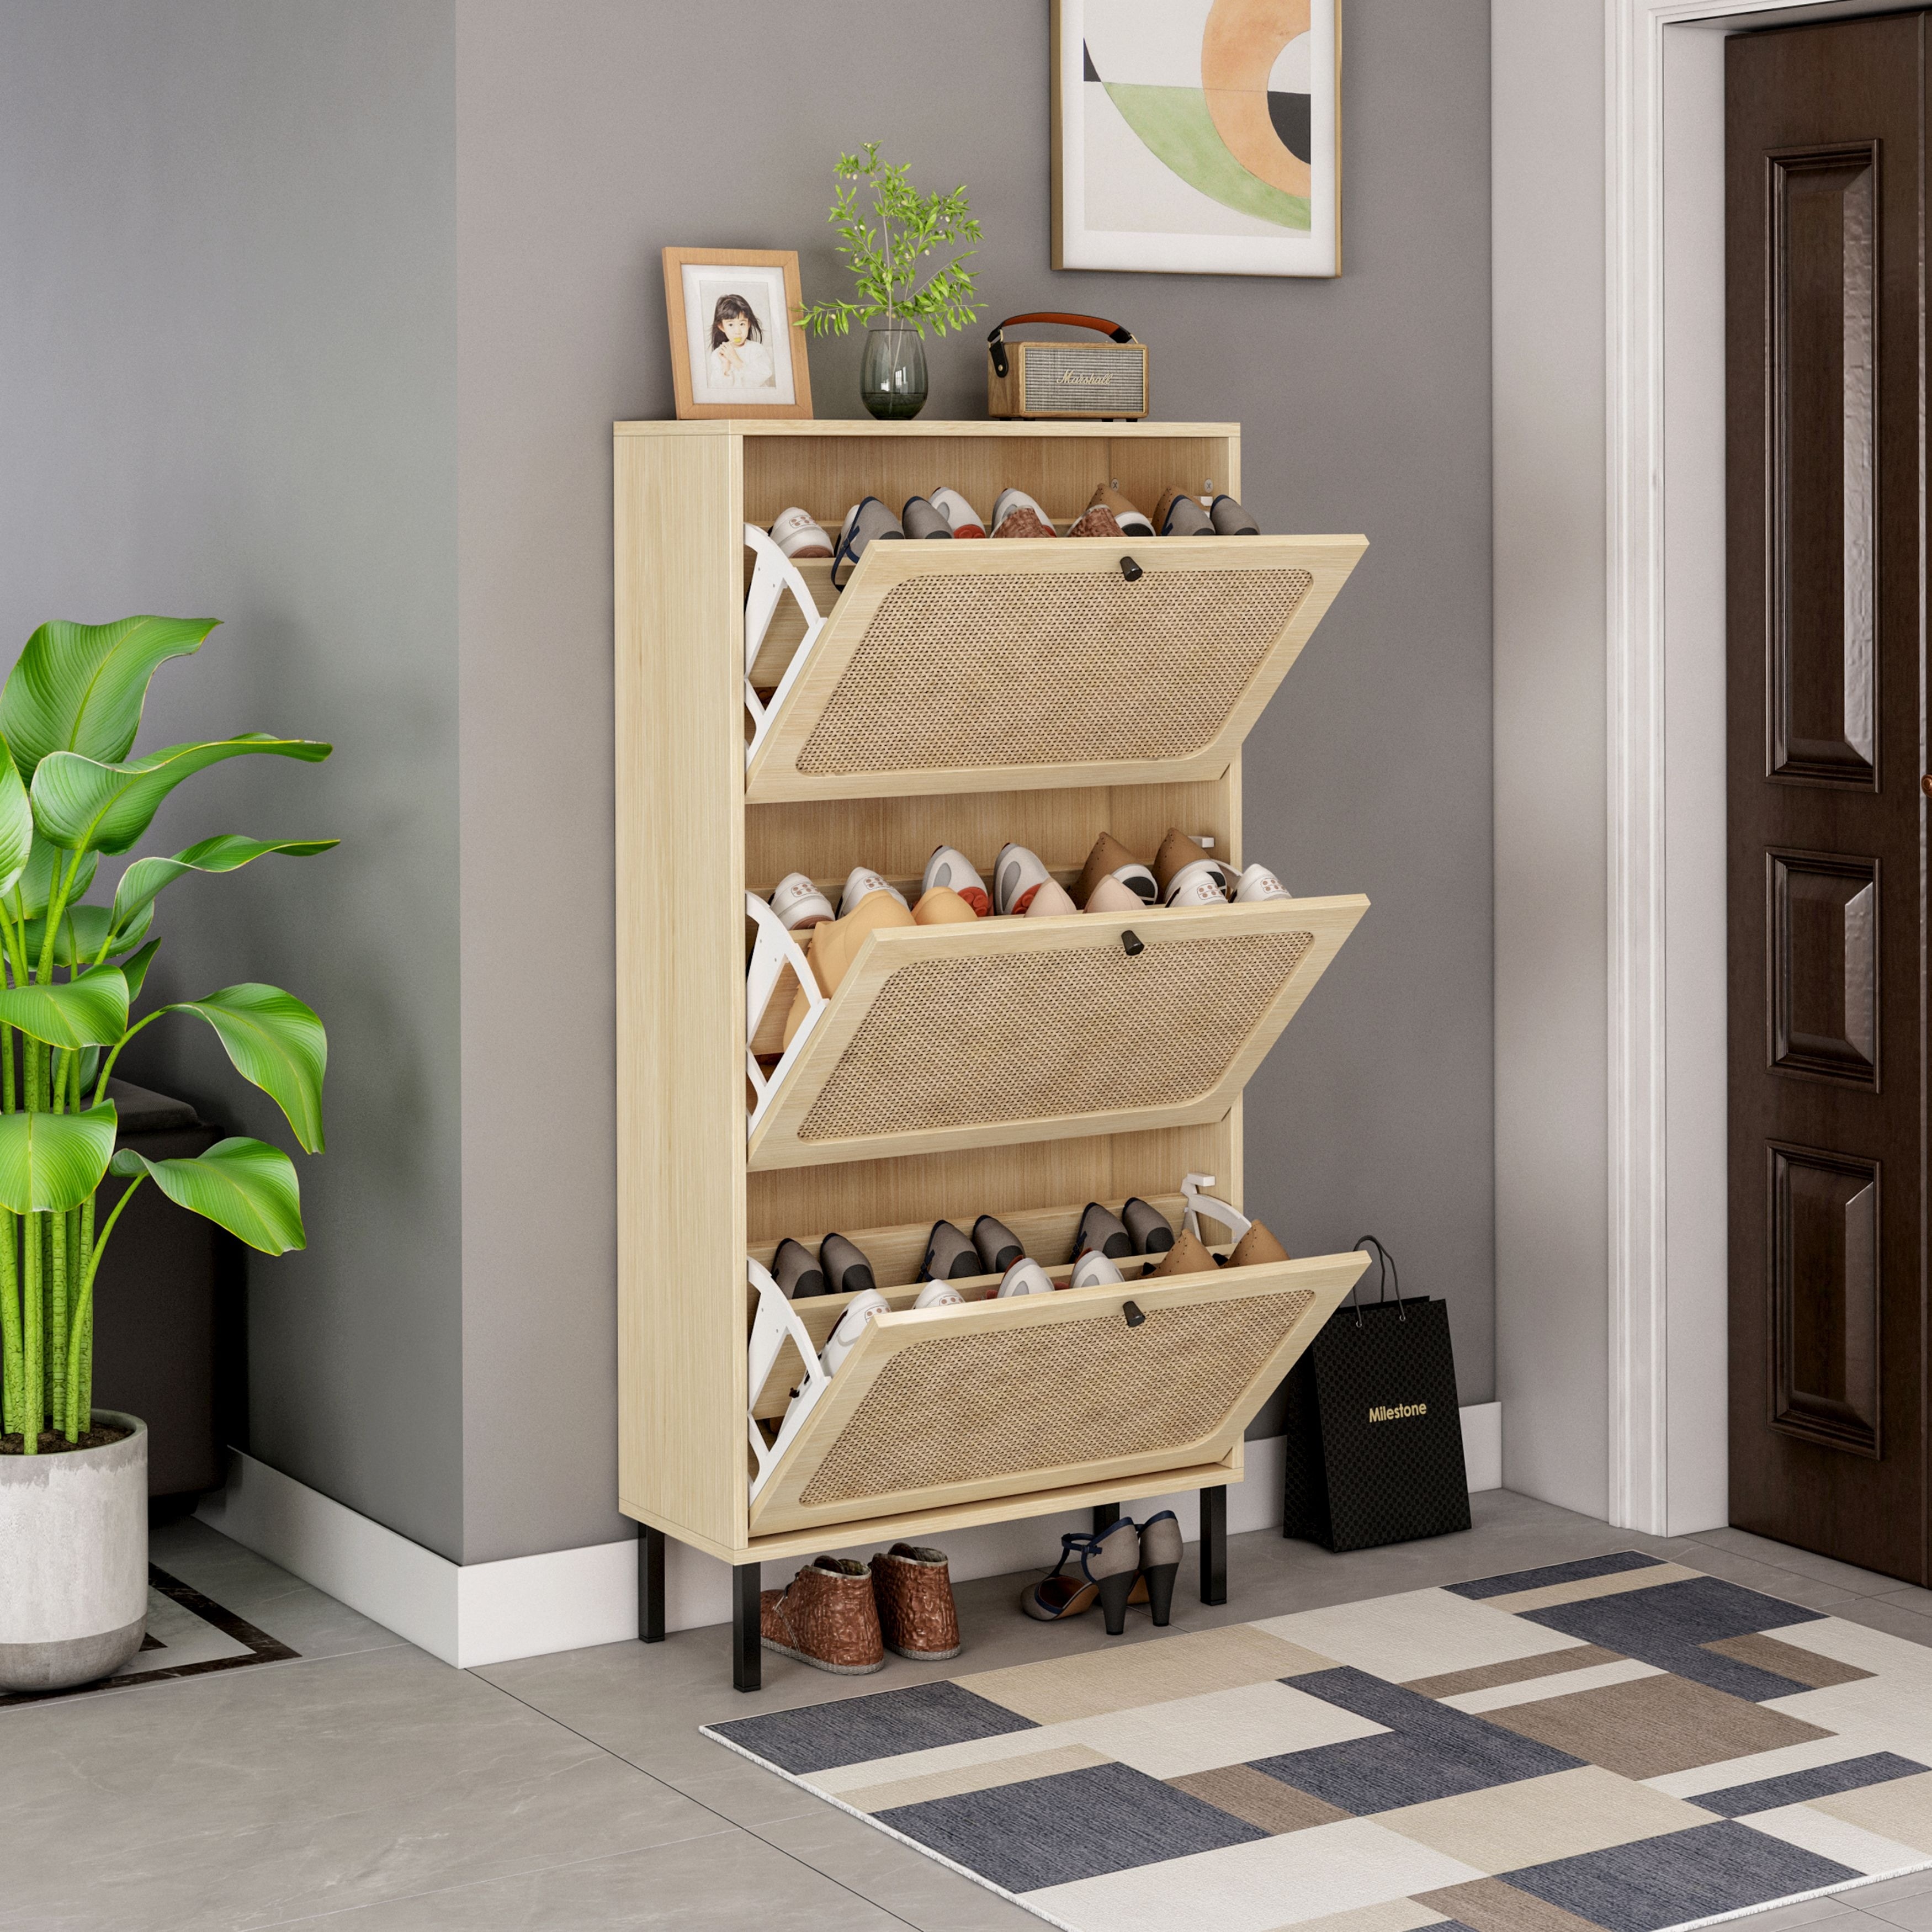 https://ak1.ostkcdn.com/images/products/is/images/direct/e47ecd5db9ac72984d9b9dc11a62771eb77e1686/Freestanding-3-Flip-Drawers-Shoe-Rack-and-3-Door-Slim-Entryway-Shoe-Organizer-with-Half-Round-Woven-Rattan-Doors.jpg